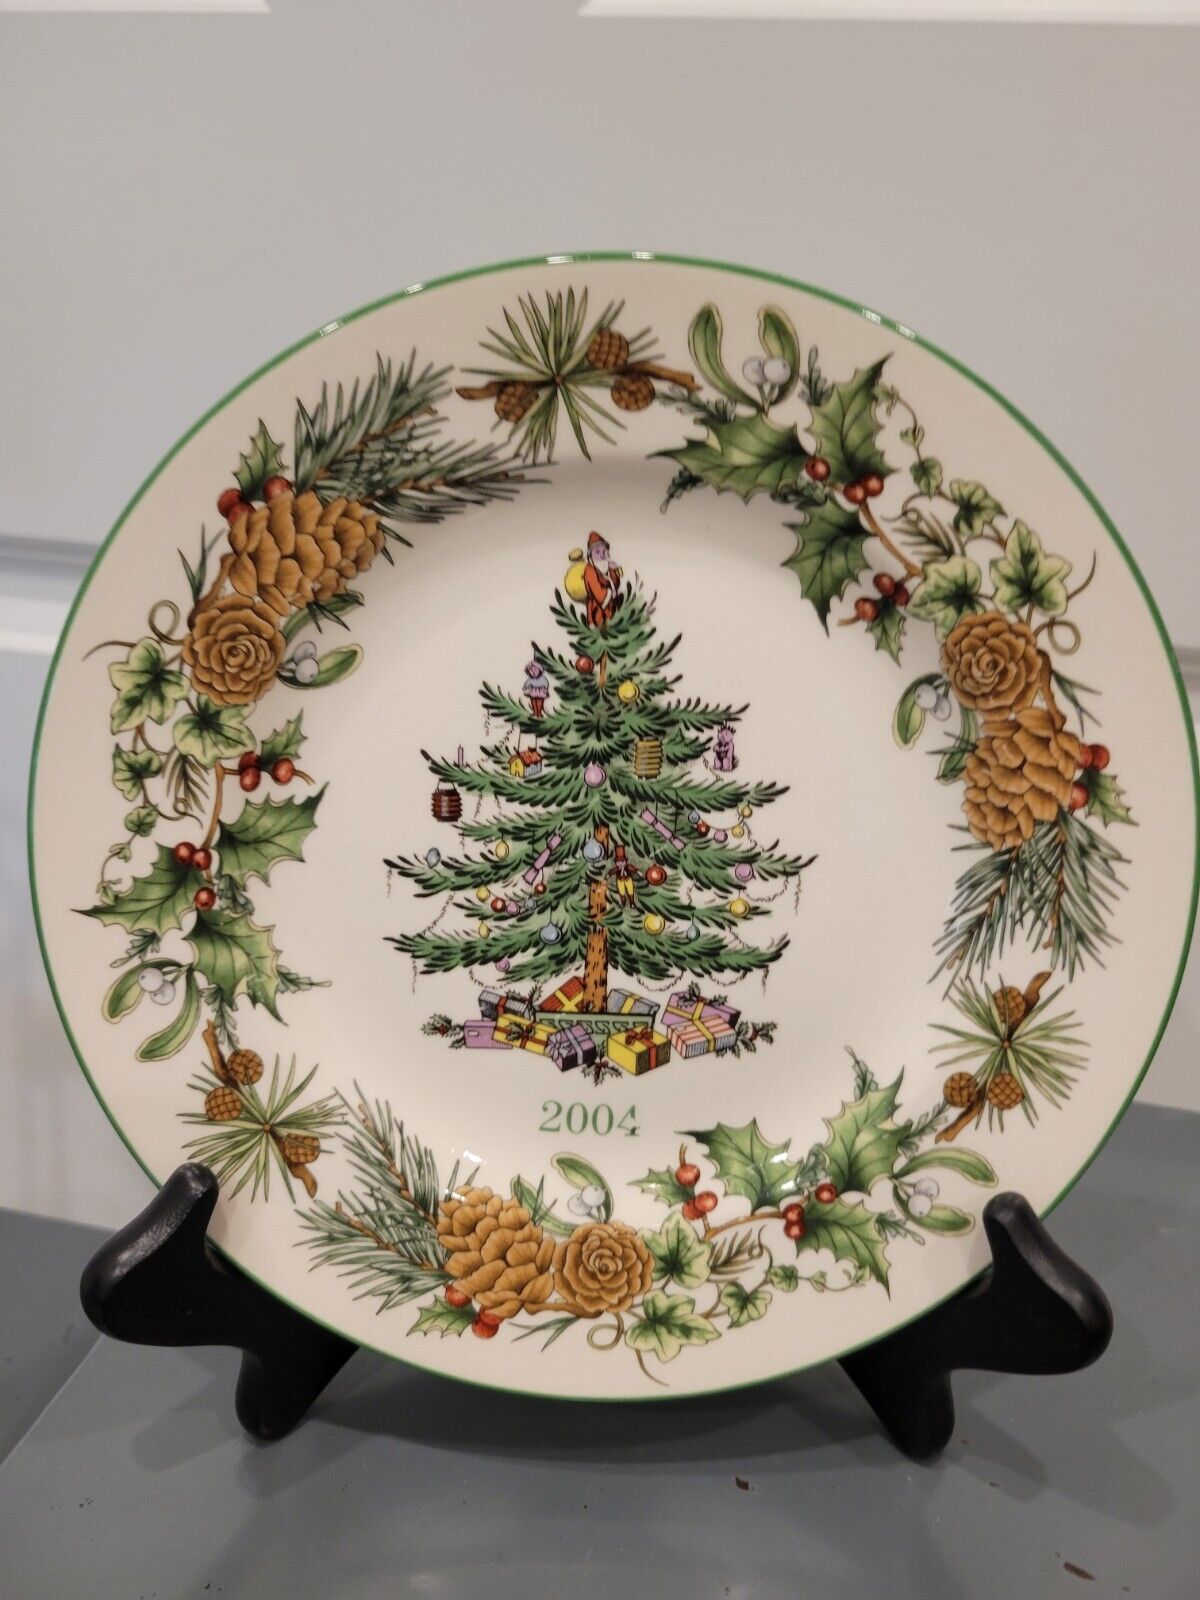 Spode Christmas Tree-Green Trim 2004 Collector Plate Pine Cones S3324-A4 Vintage